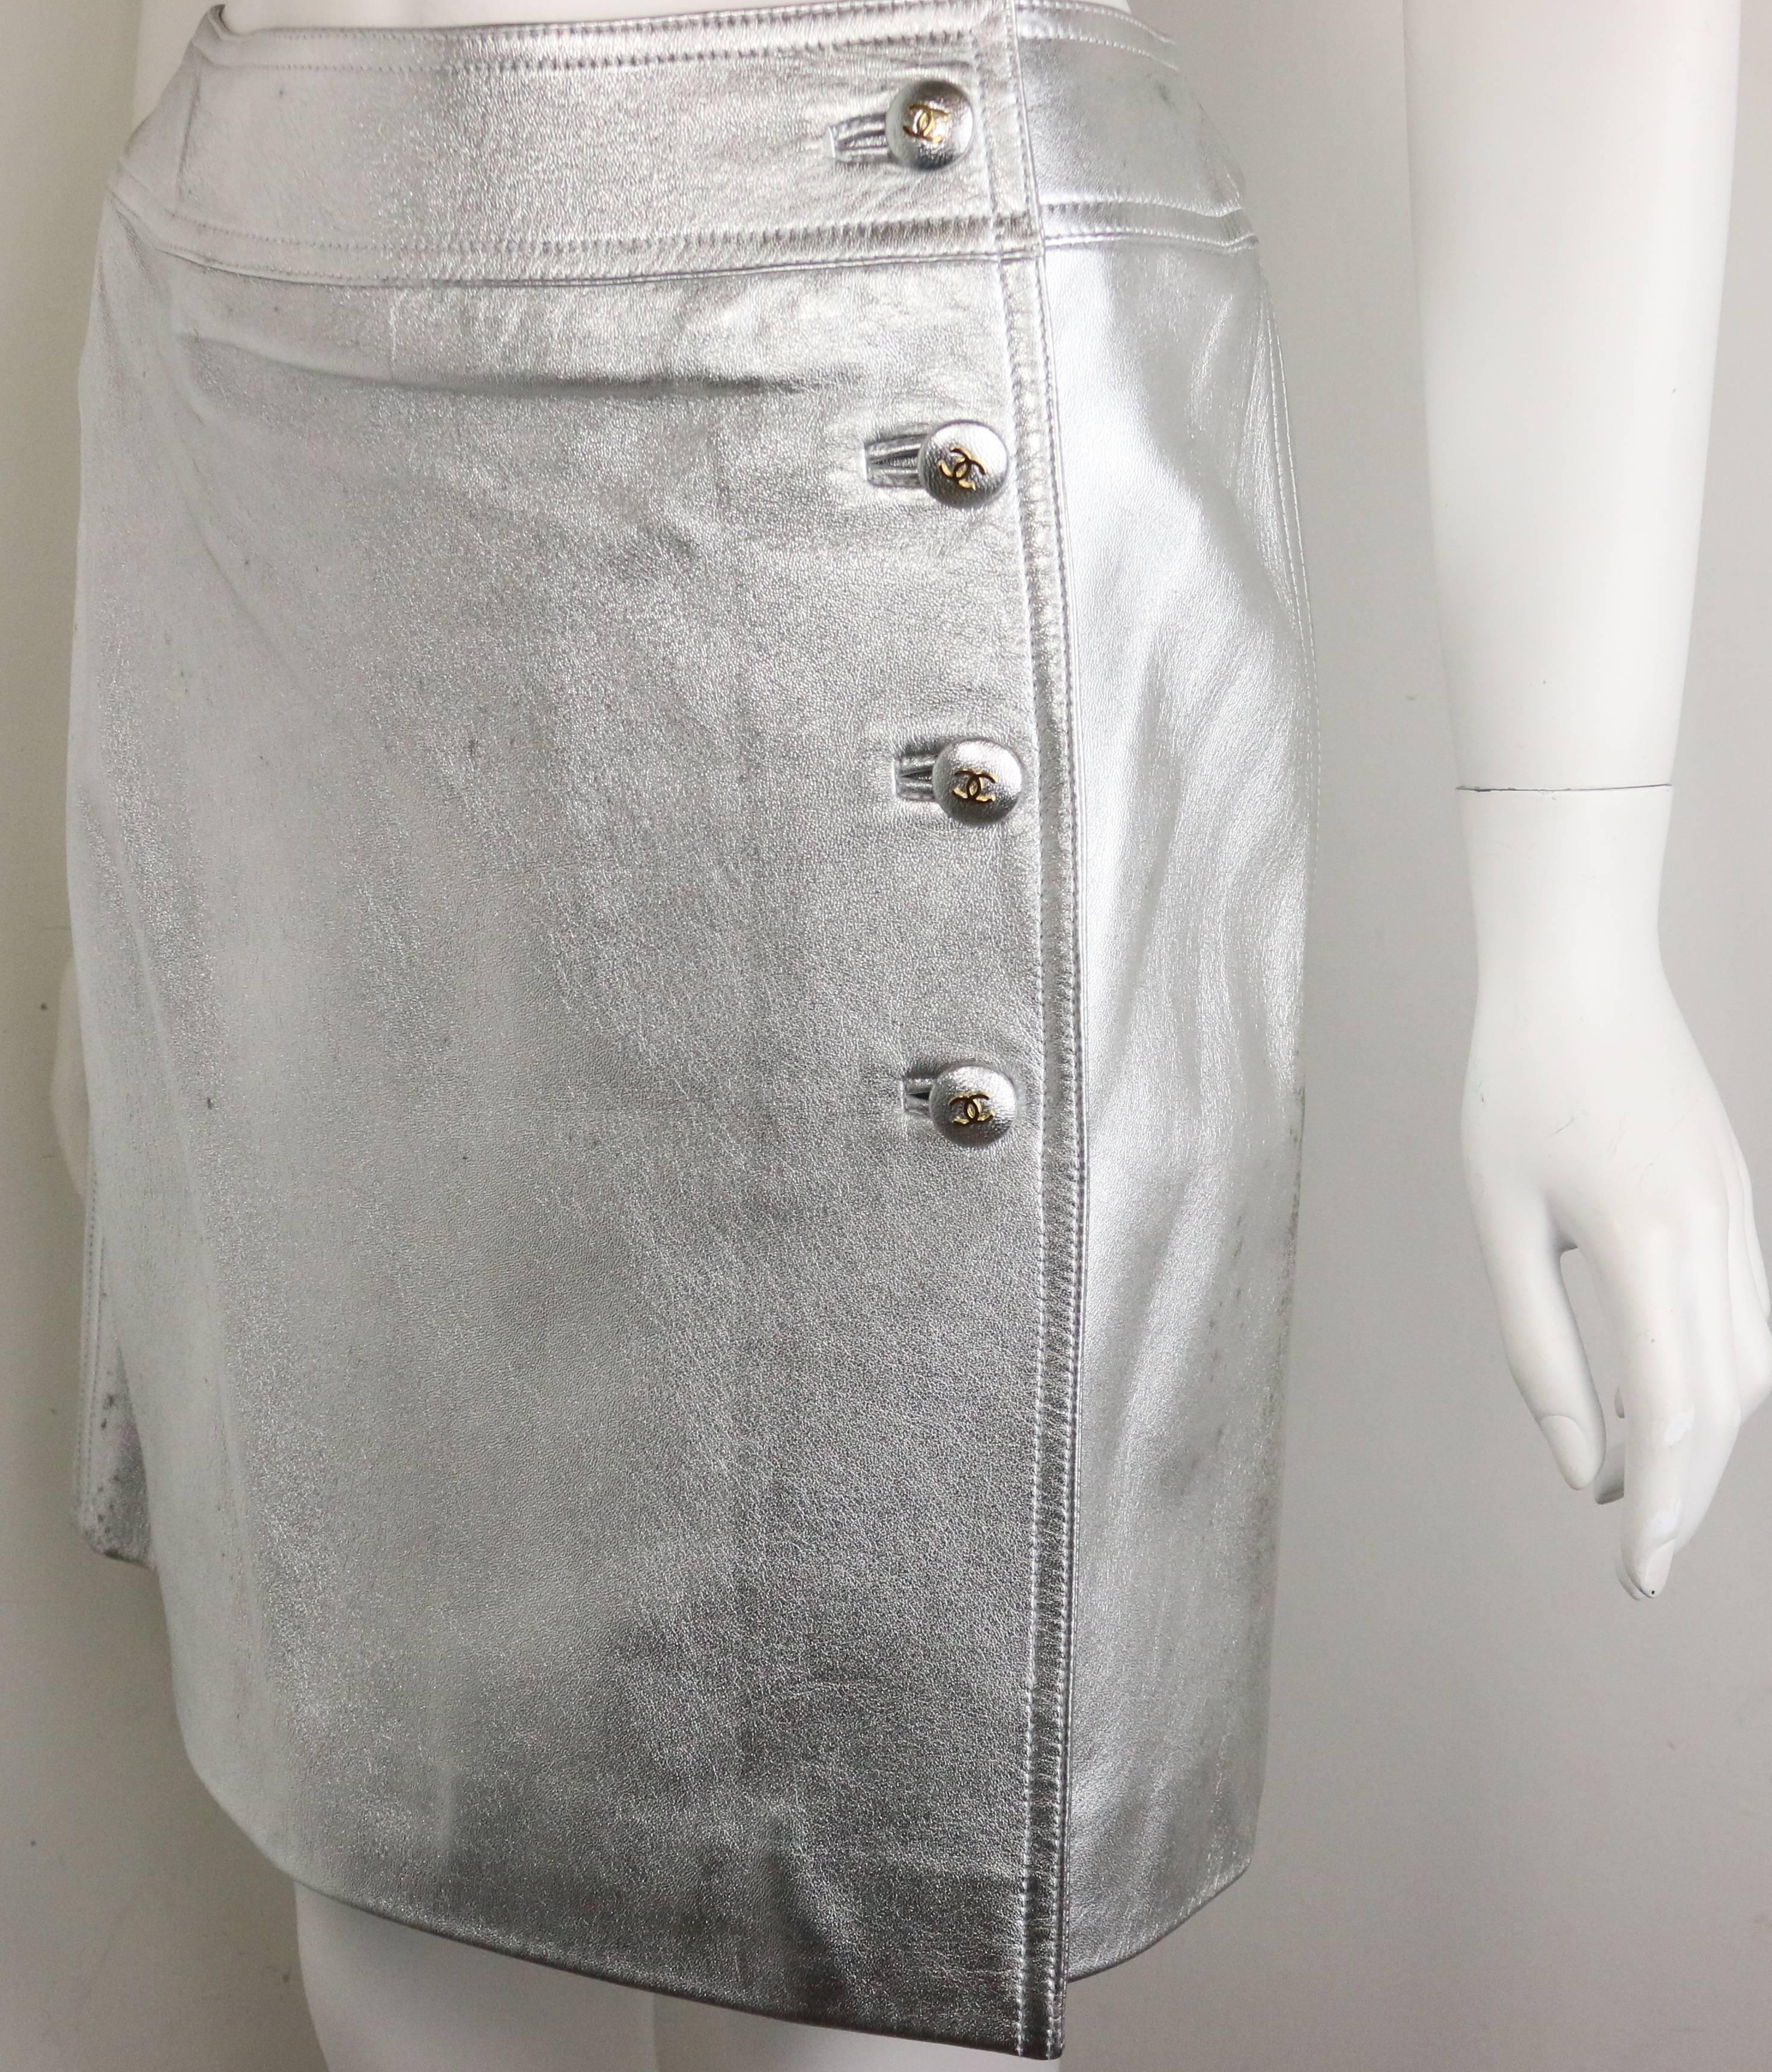 - Chanel silver metallic lambskin leather wrap skirt from Fall 1996 collection. 

- Featuring four silver metallic "CC" buttons down the side and a hook on the side closure. 

- Lined w CC lining. 

- Made in France. 

- Size 40.